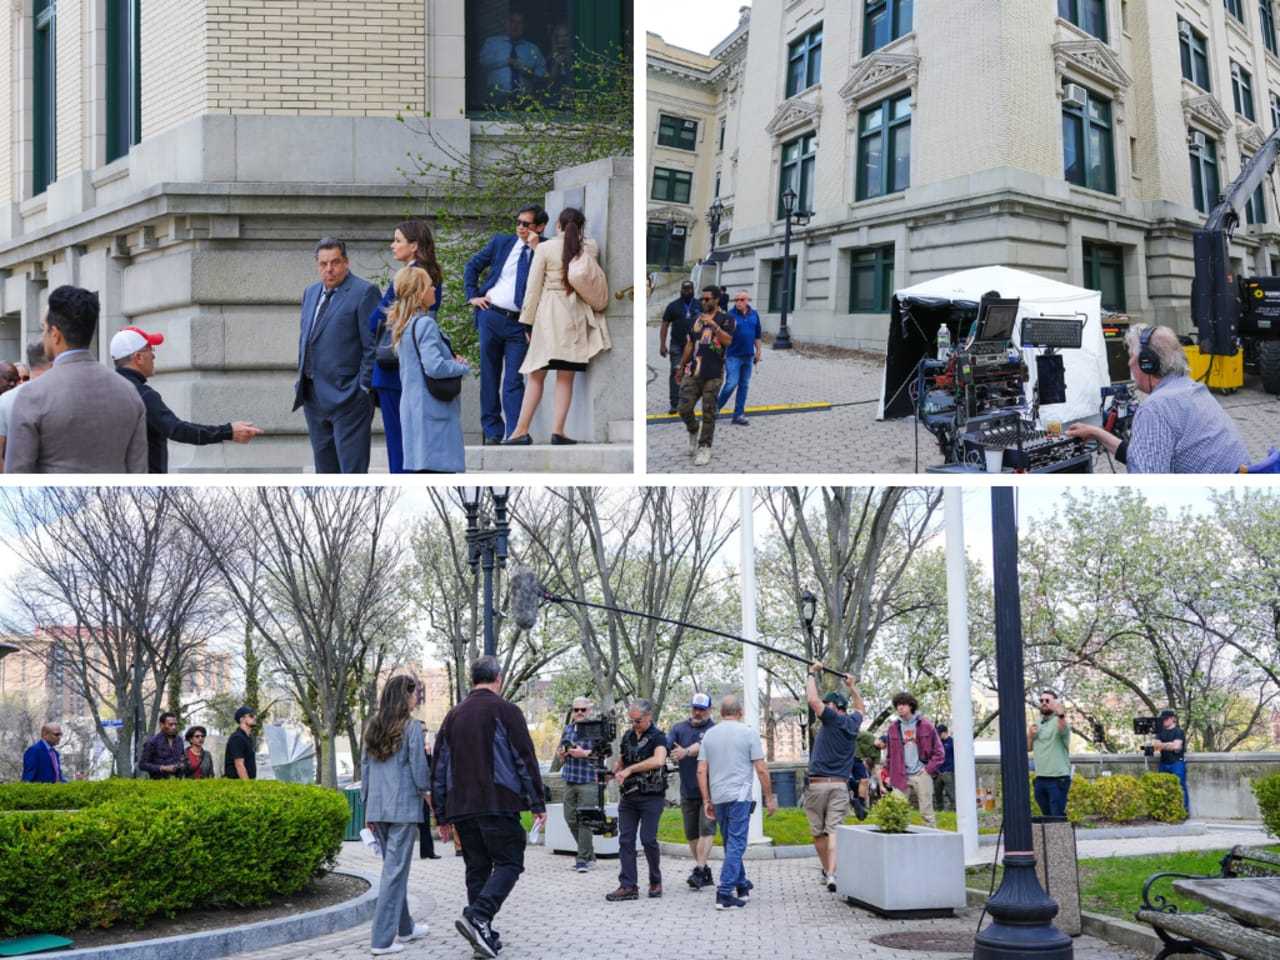  'Hollywood On Hudson': Filming For CBS's 'Blue Bloods' Takes Place In Westchester 